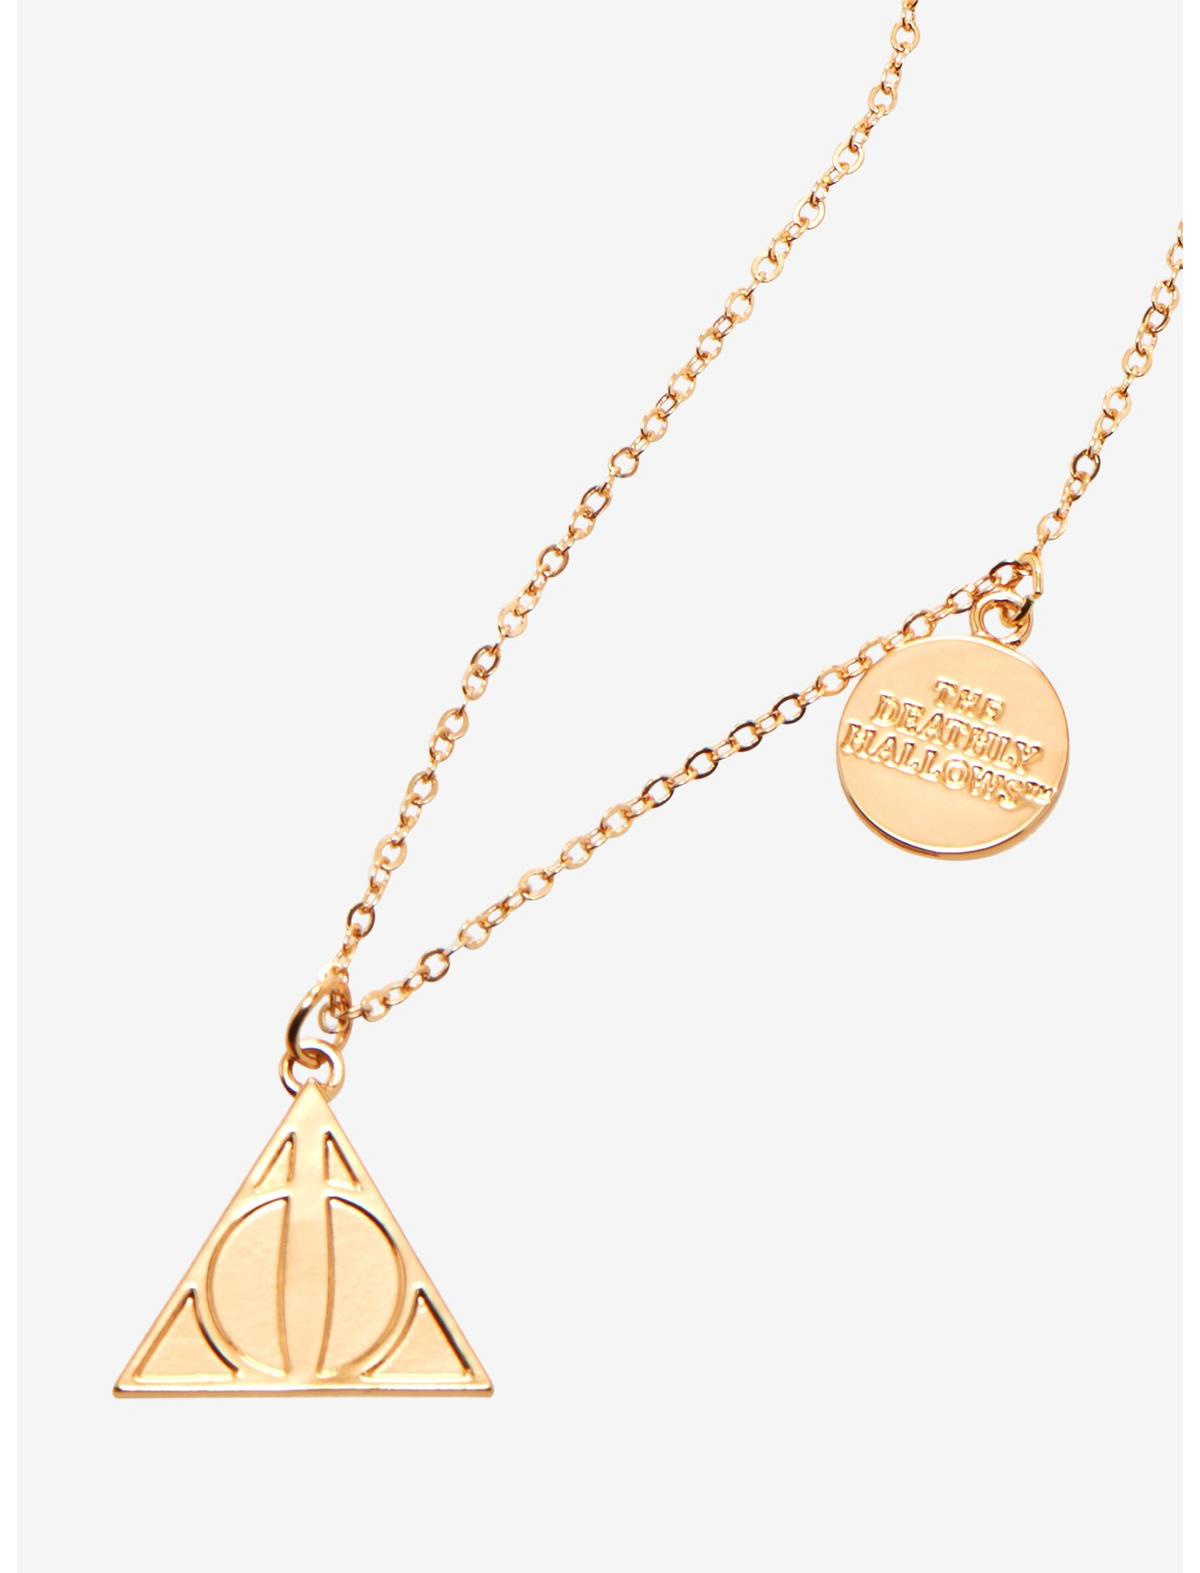 WNX0054 Harry Potter Necklace - Deathly Hallows | Elephant Bookstore